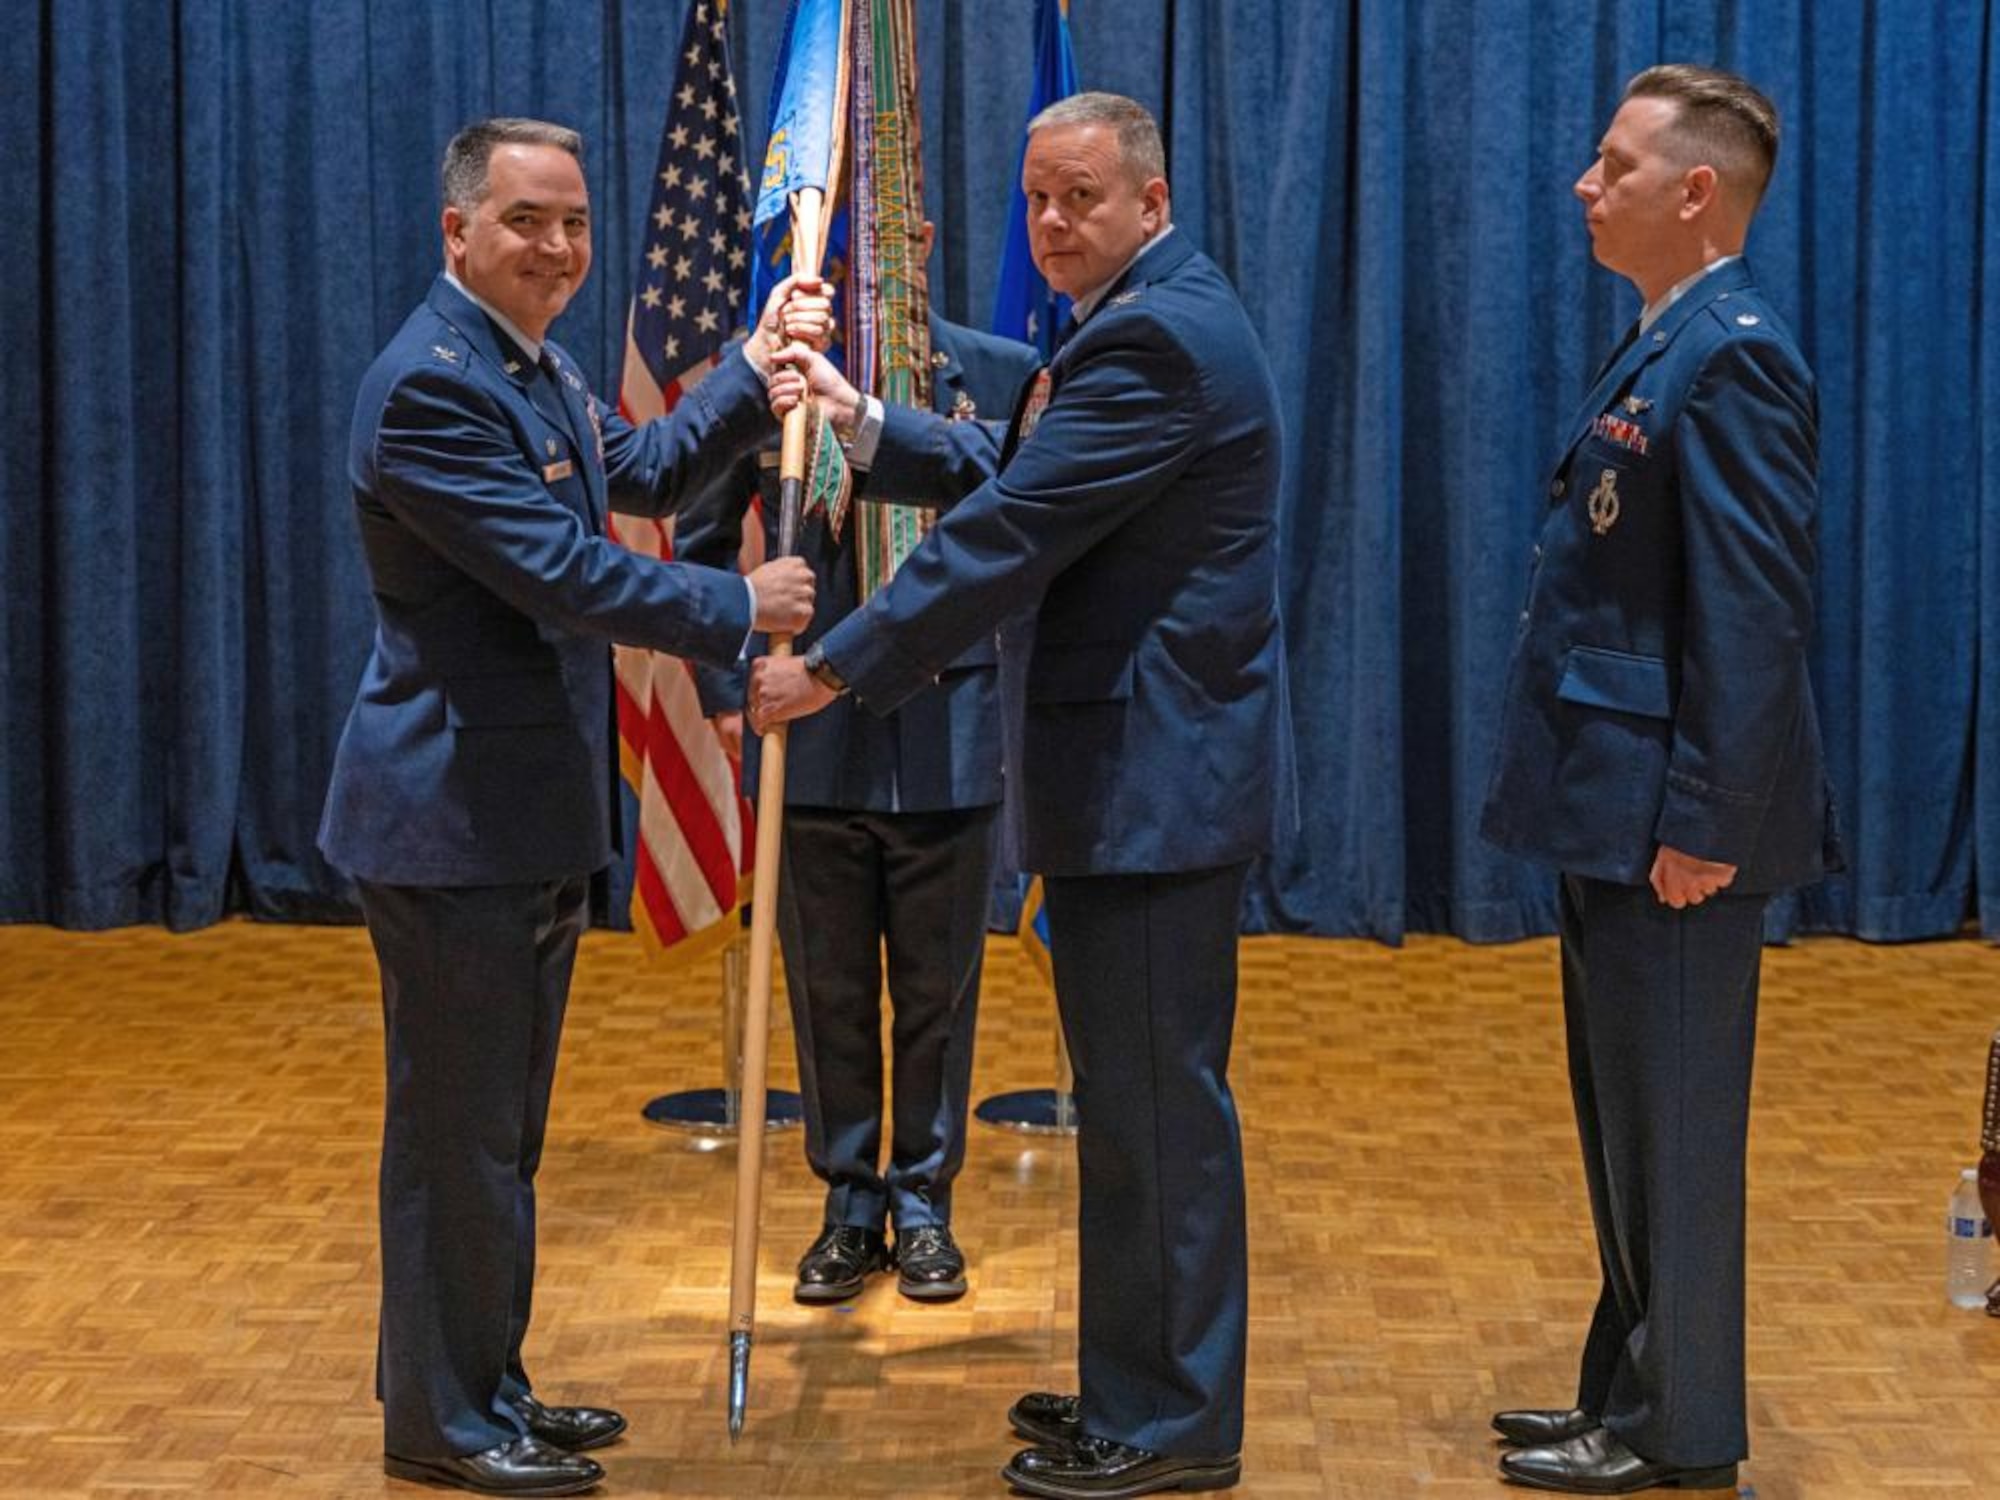 Col. Jason Vattioni (left), 377th Air Base Wing commander, accepts the 576th Flight Test Squadron guidon from Col. Christopher Cruise (center), outgoing commander 576FLTS, during a Change of Command ceremony November 8, 2022 at Vandenberg Space Force Base, Californis as Lt. Col. Tony Santino looks on. (Photo by MSgt Guy McCutcheon, 576 FLTS)